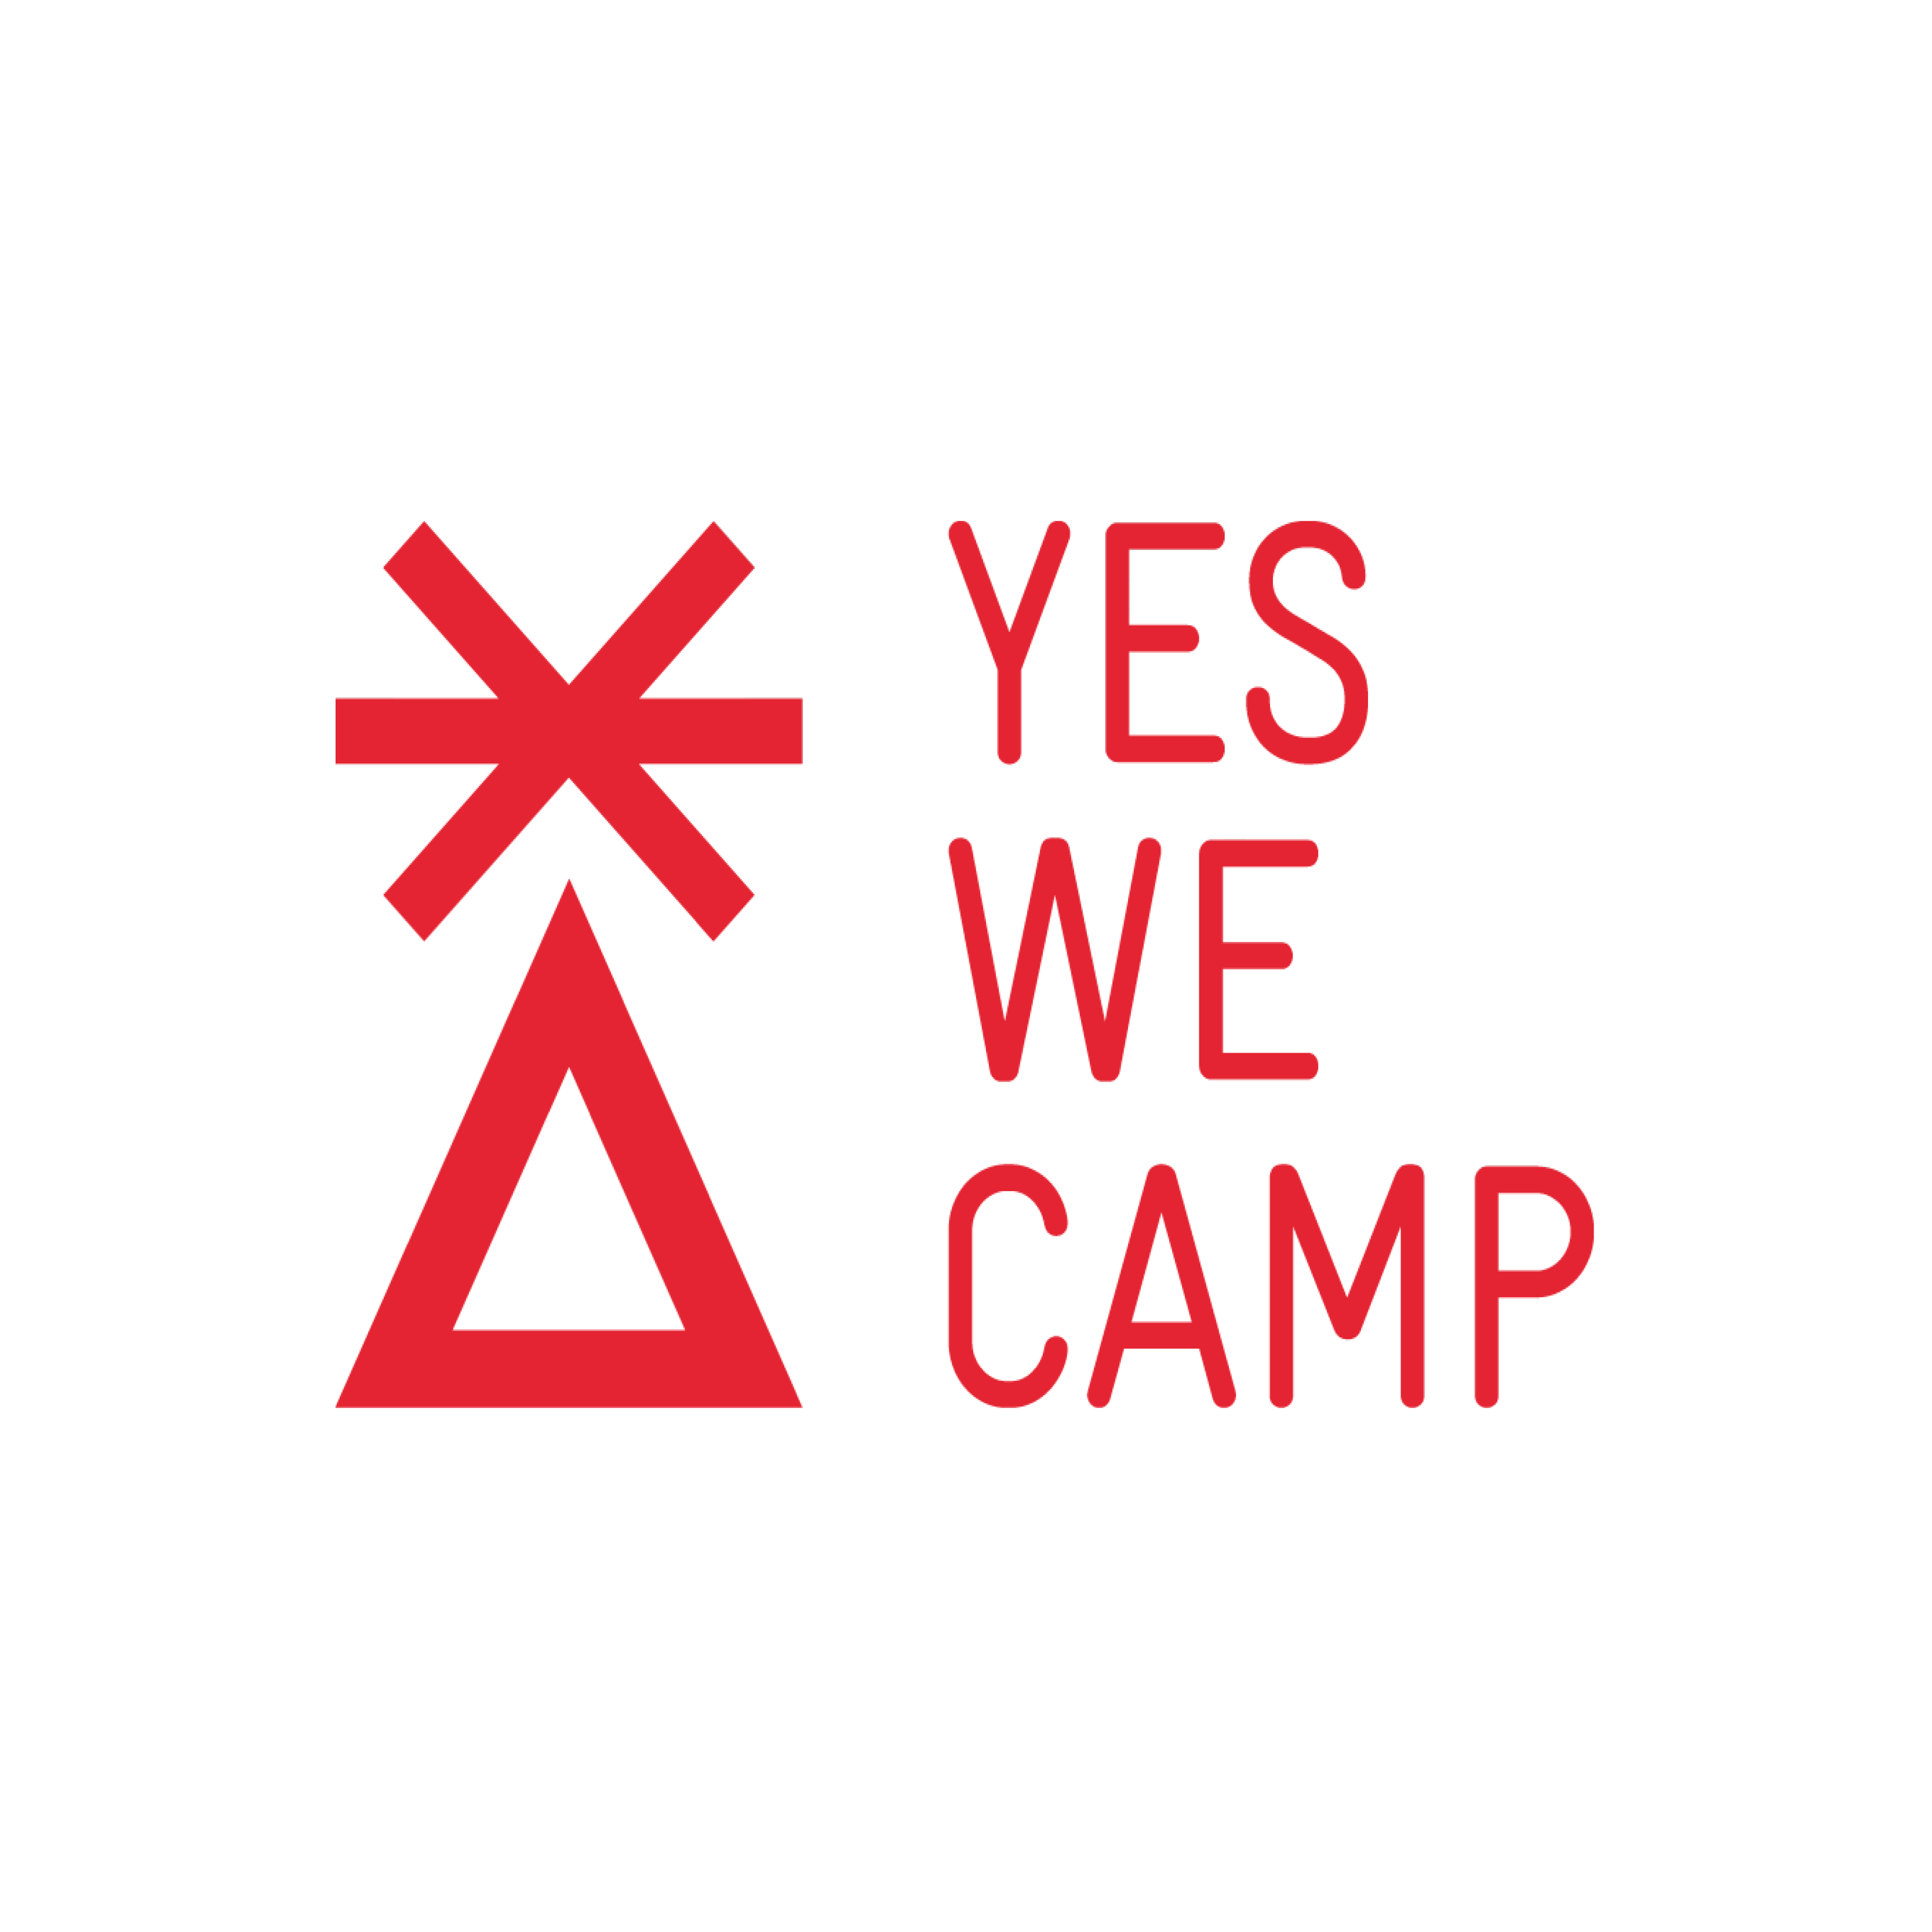 Yes we camp